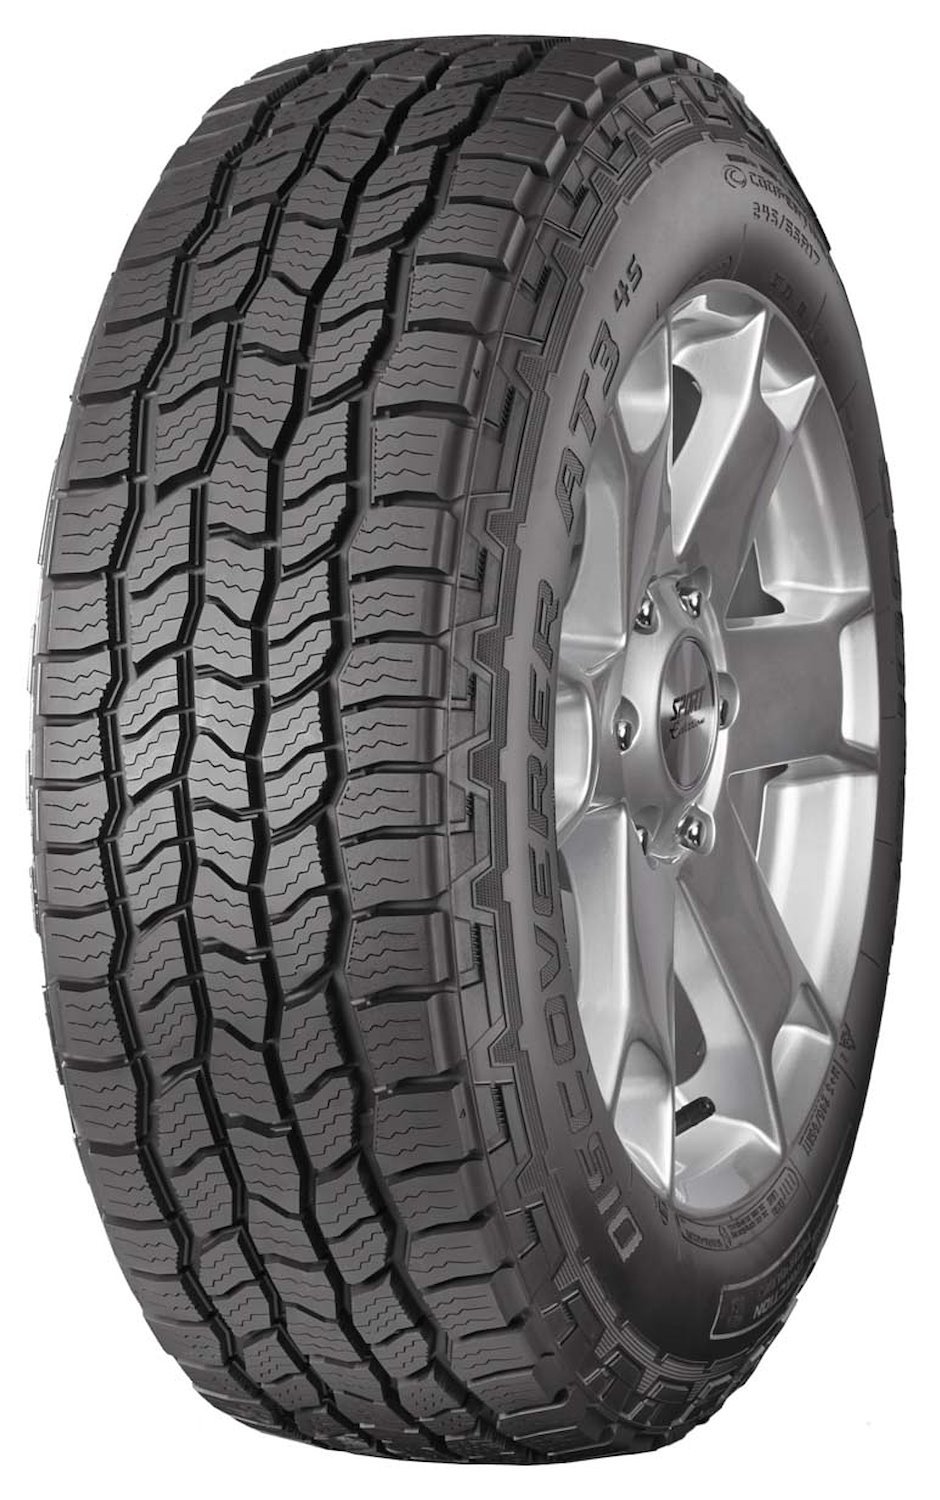 Discoverer AT3 4S All-Terrain Tire, 255/50R20